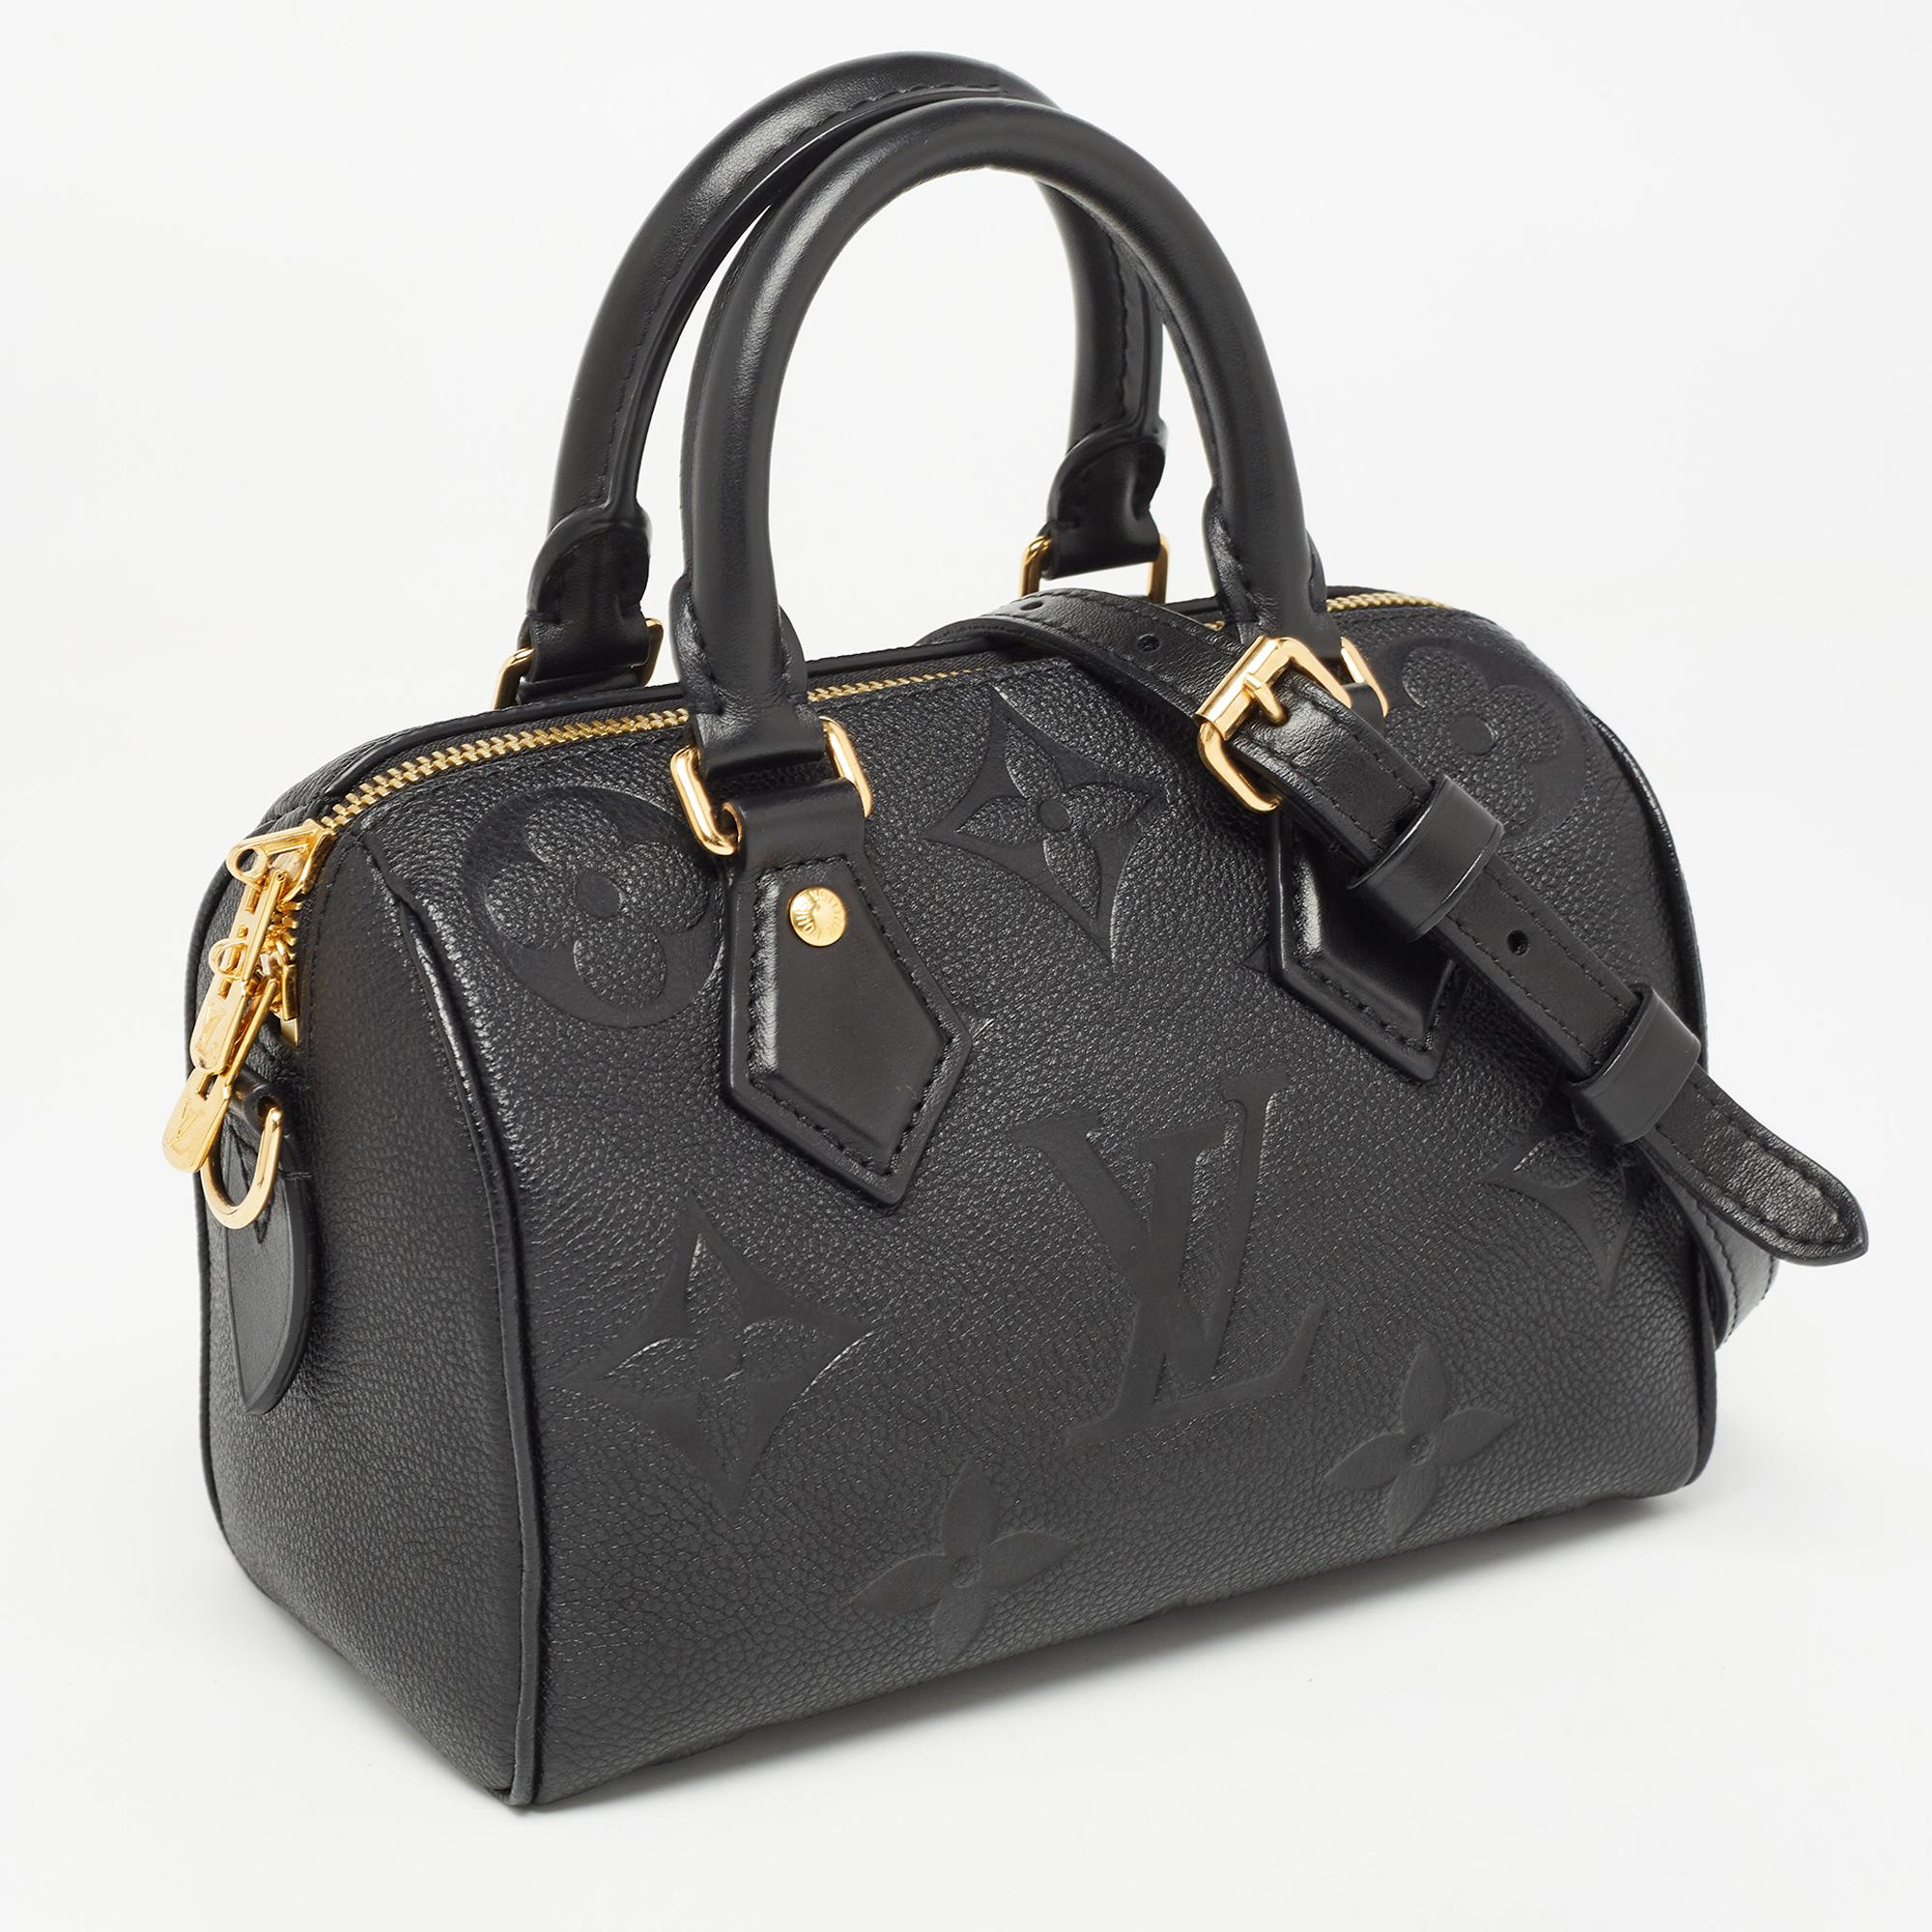 This Cartier beauty arrives in a gorgeous shape and design. It has a leather construction with logo detailing and two handles on top. The zipper secures the fabric interior and overall, the bag looks ready to lift your classic style.

